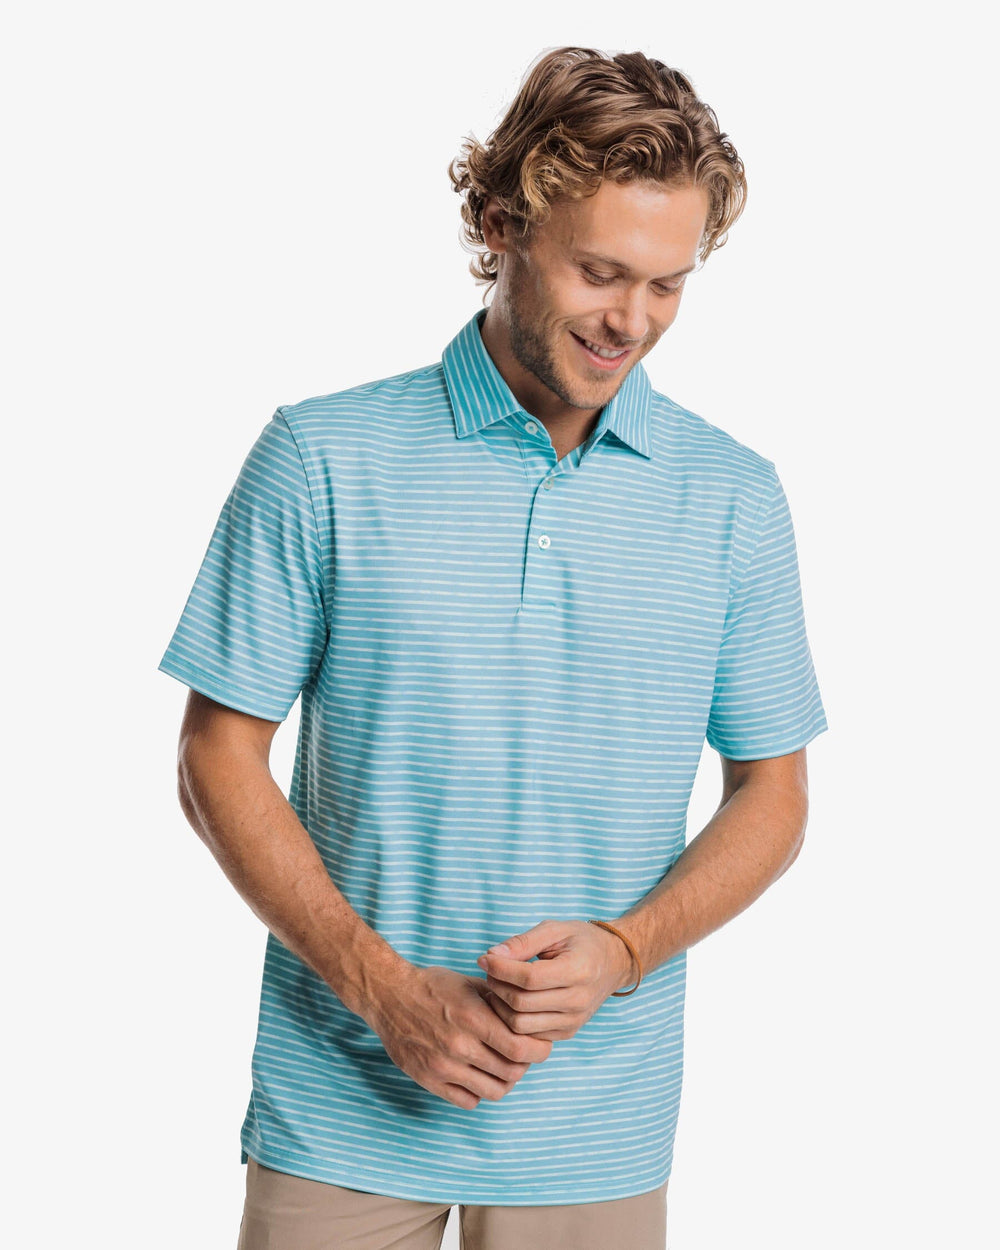 The front view of the Southern Tide Driver Wymberly Stripe Performance Polo Shirt by Southern Tide - Tidal Wave